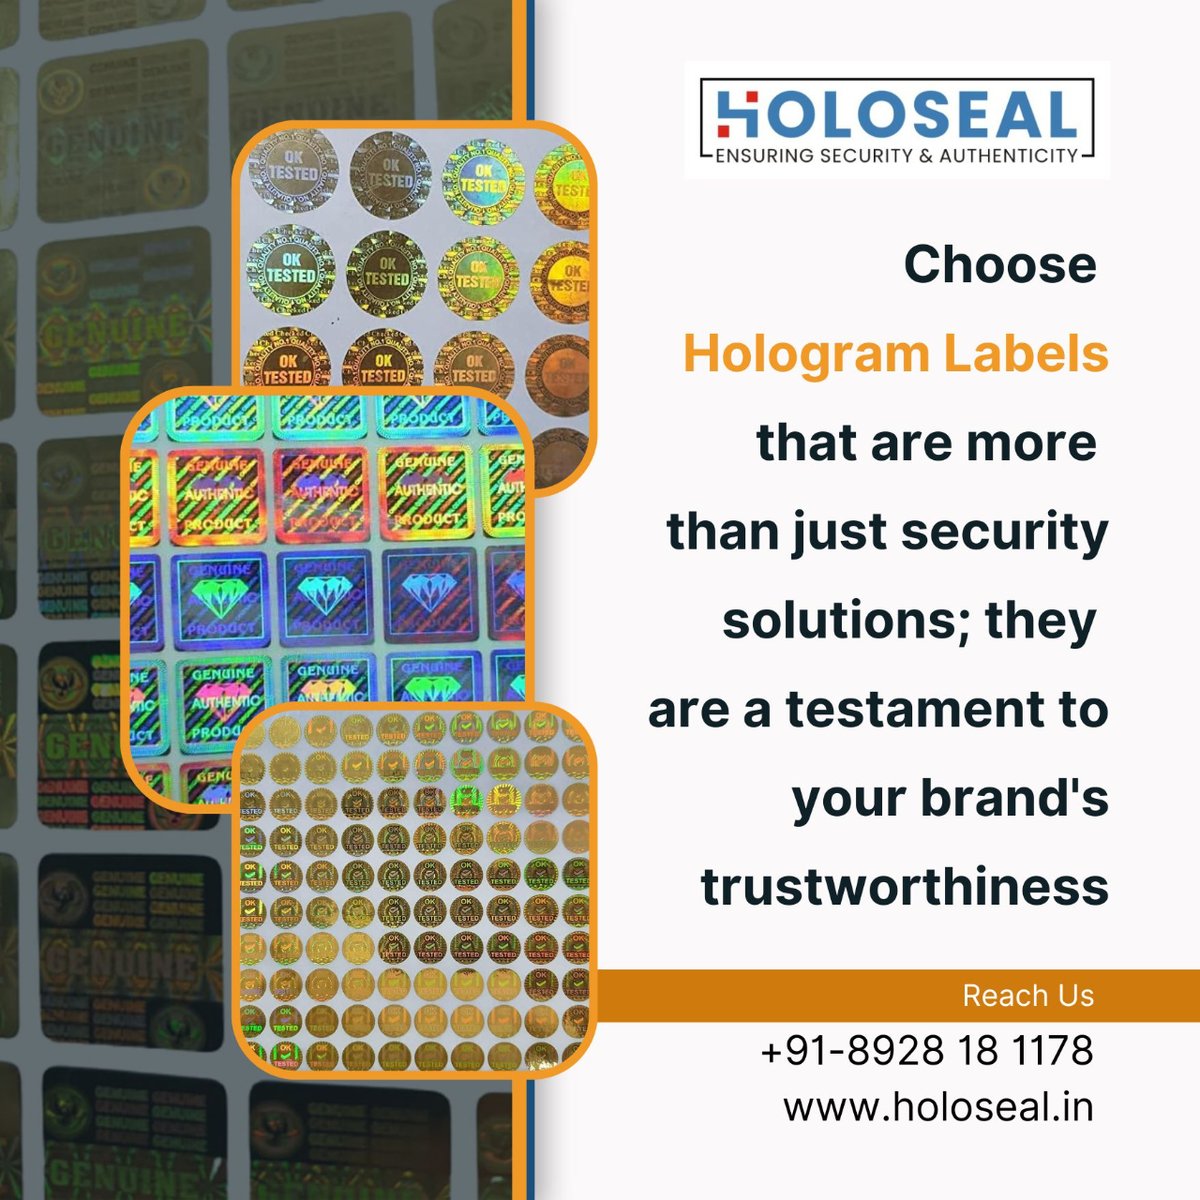 'Choose hologram labels that are more than just security solutions; they are a testament to your brand's trustworthiness. #TrustworthyBrands #HologramTestament #Holoseal'

i.mtr.cool/gapciorlbc